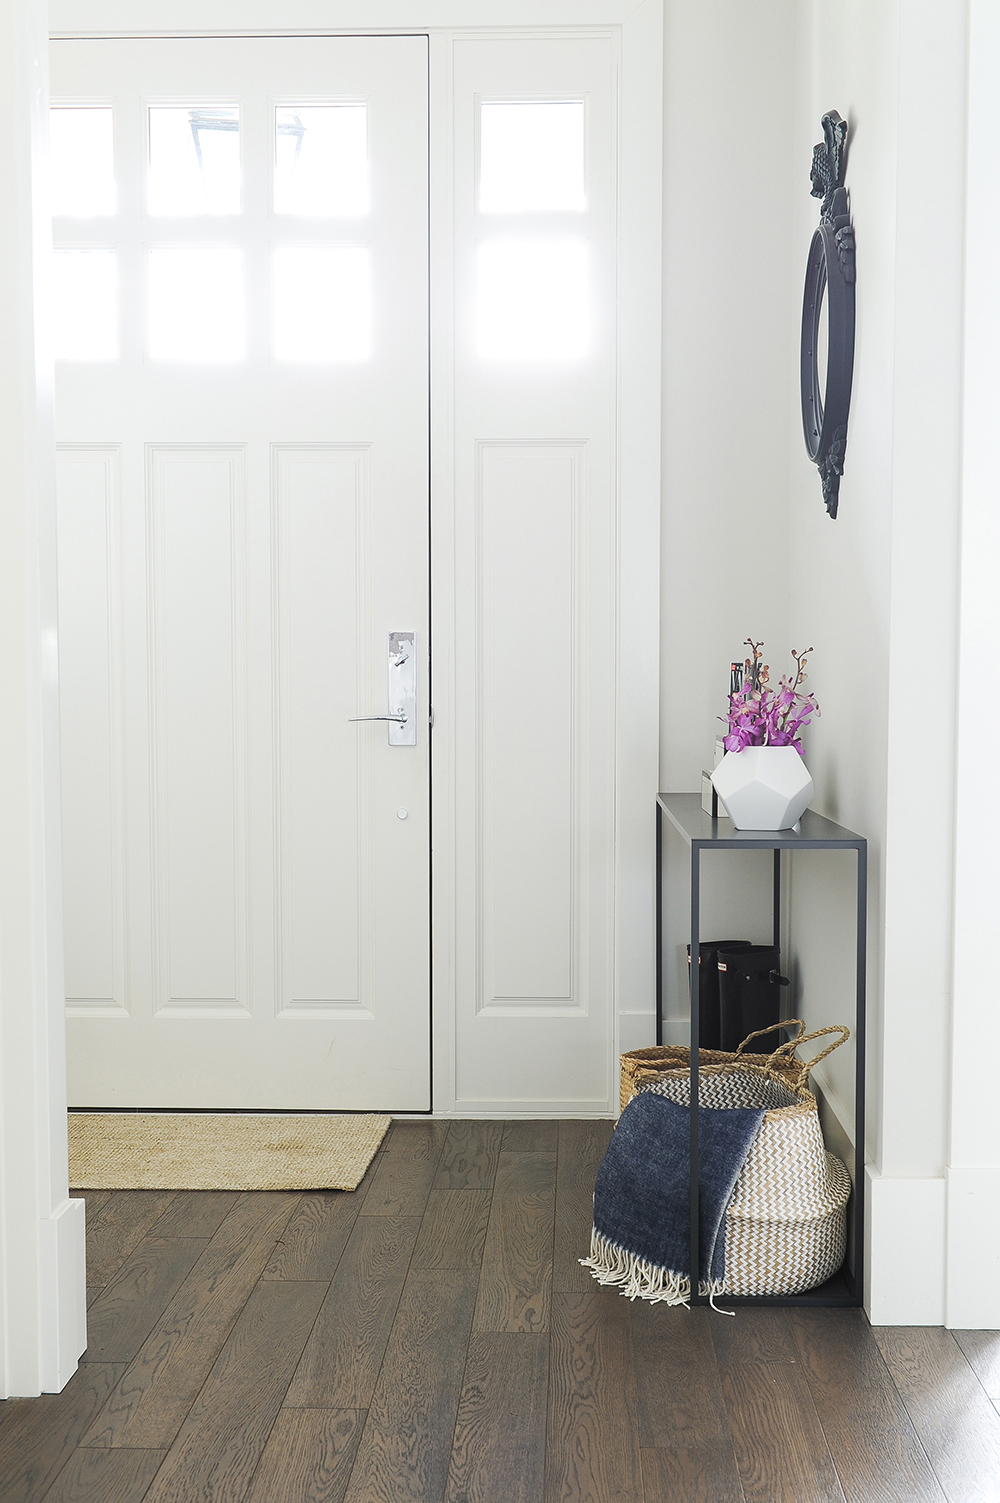 A bright and light-filled entryway.